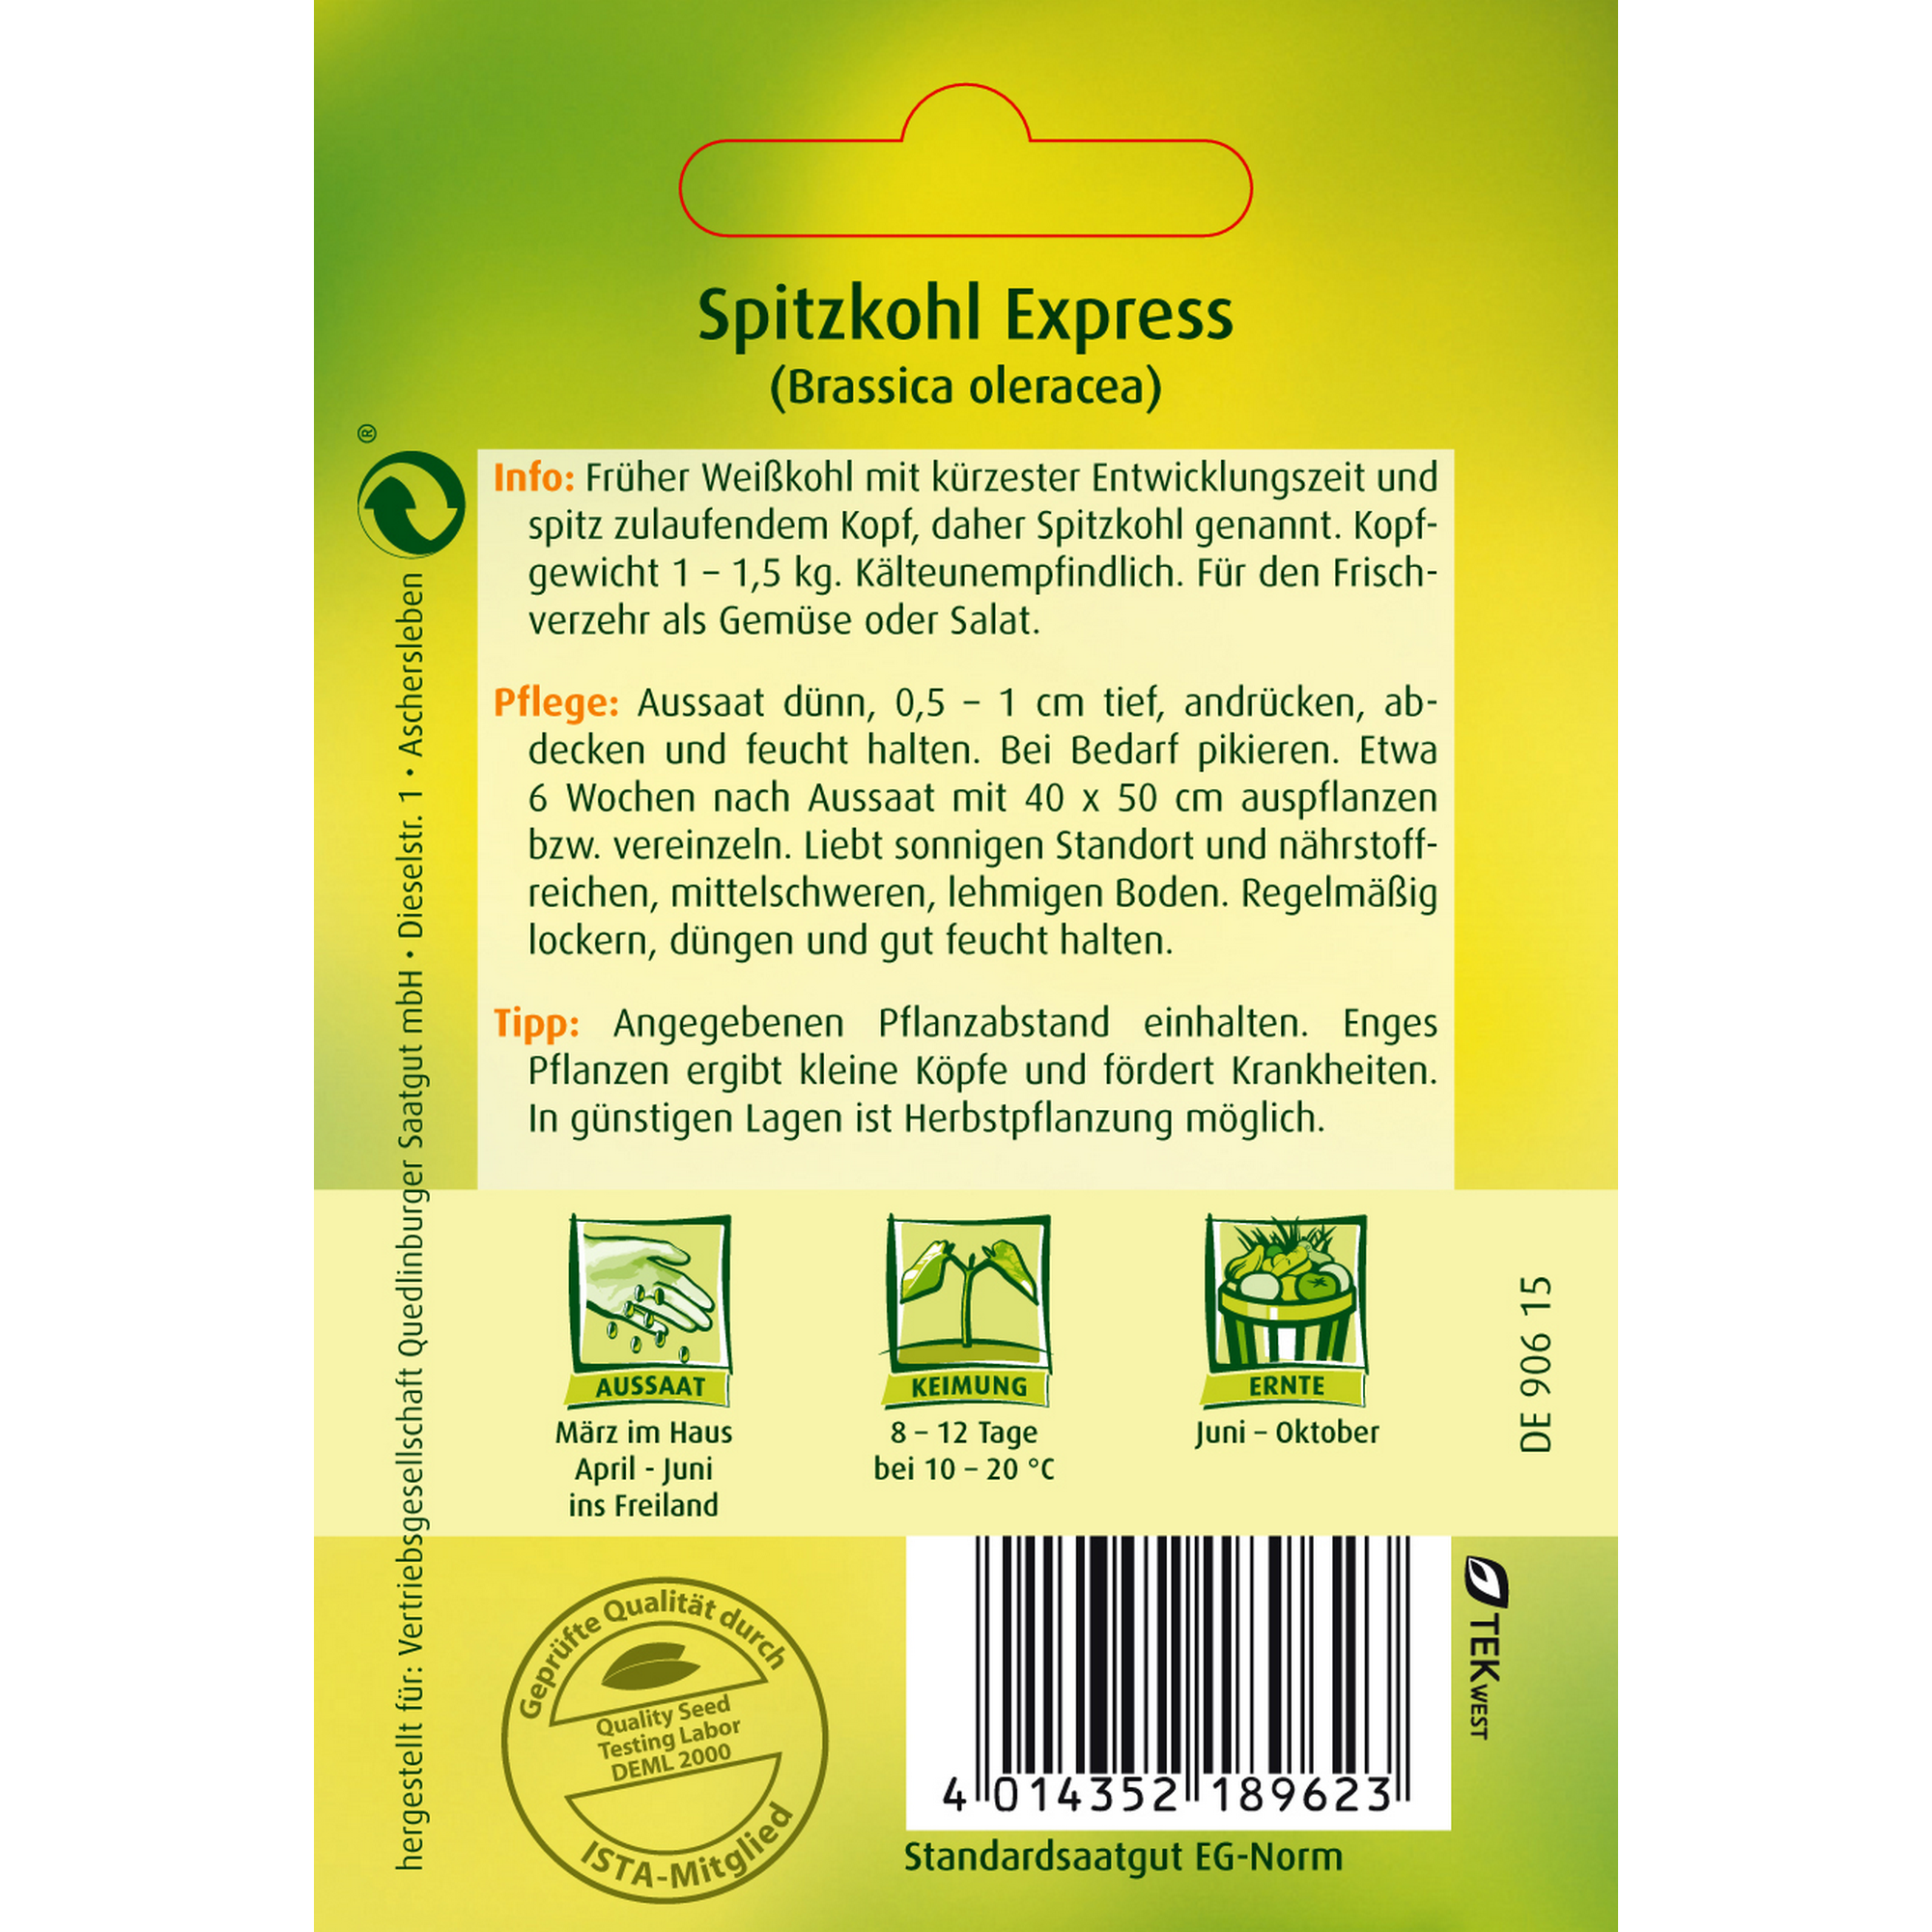 Spitzkohl 'Express' + product picture